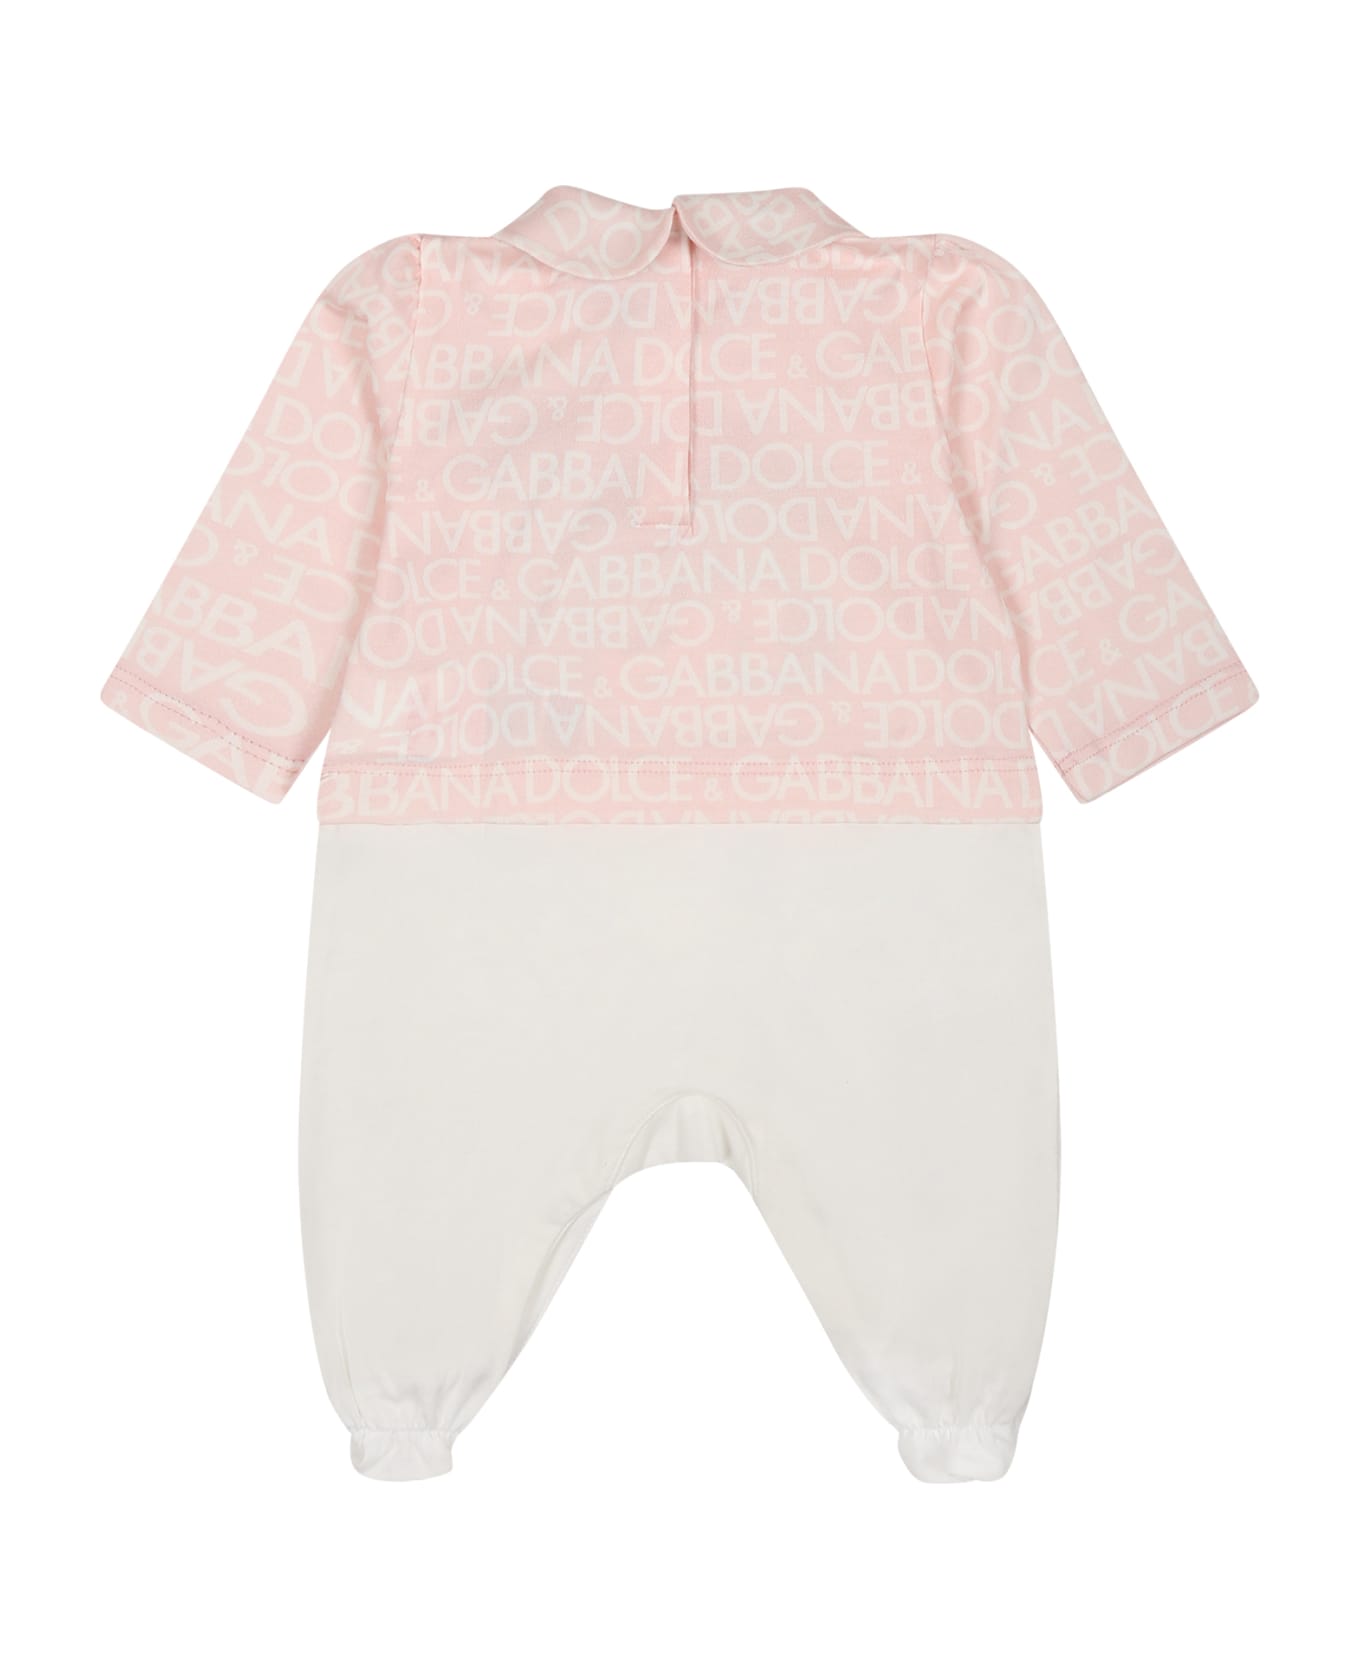 Dolce & Gabbana Pink Set For Baby Girl With Goldmanschettenkn And Leoaprds - Pink